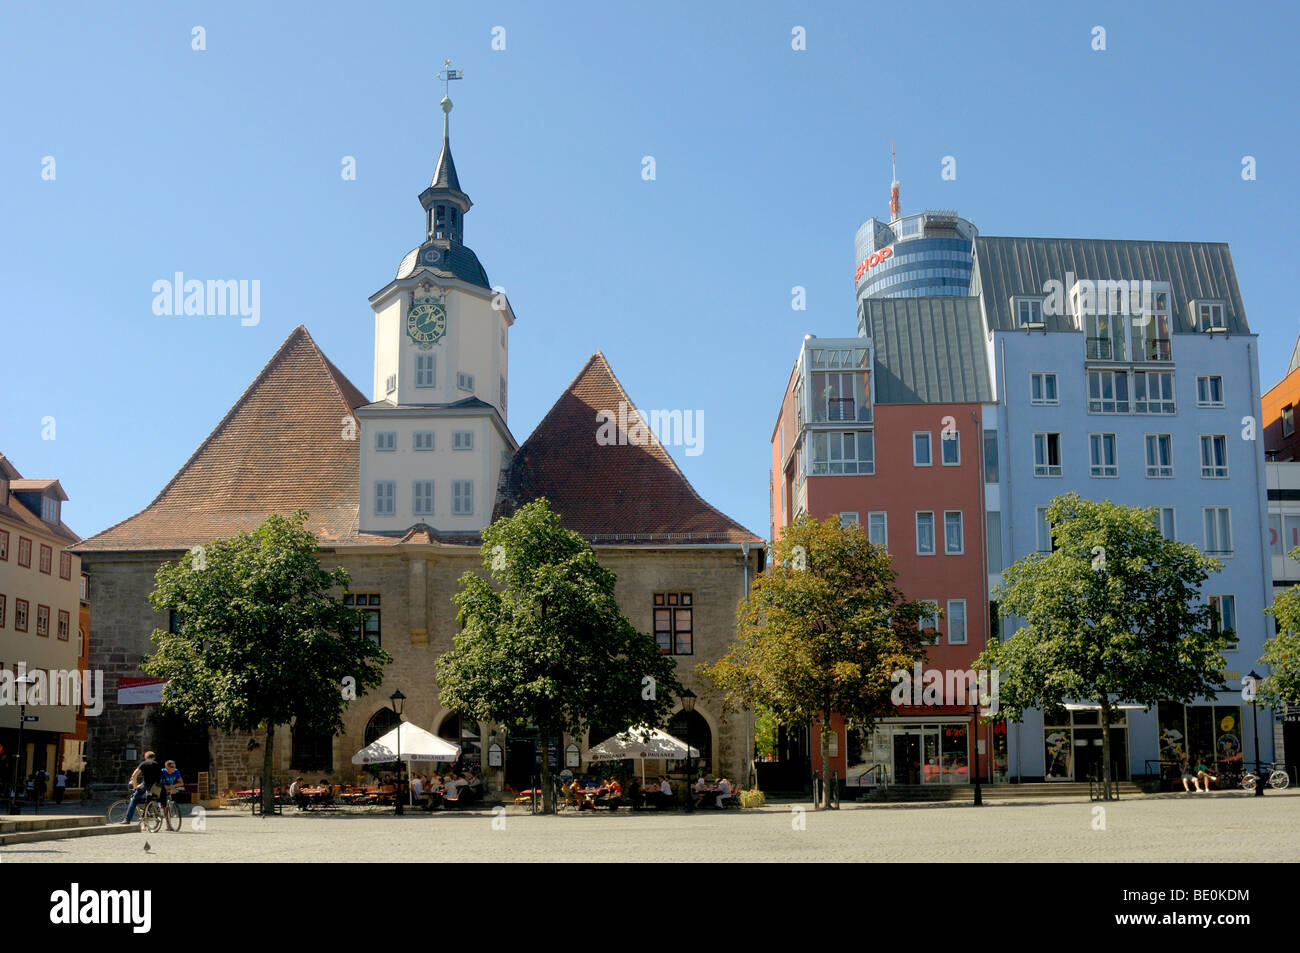 Market square with town hall, Jena, Thuringia, Germany, Europe Stock Photo